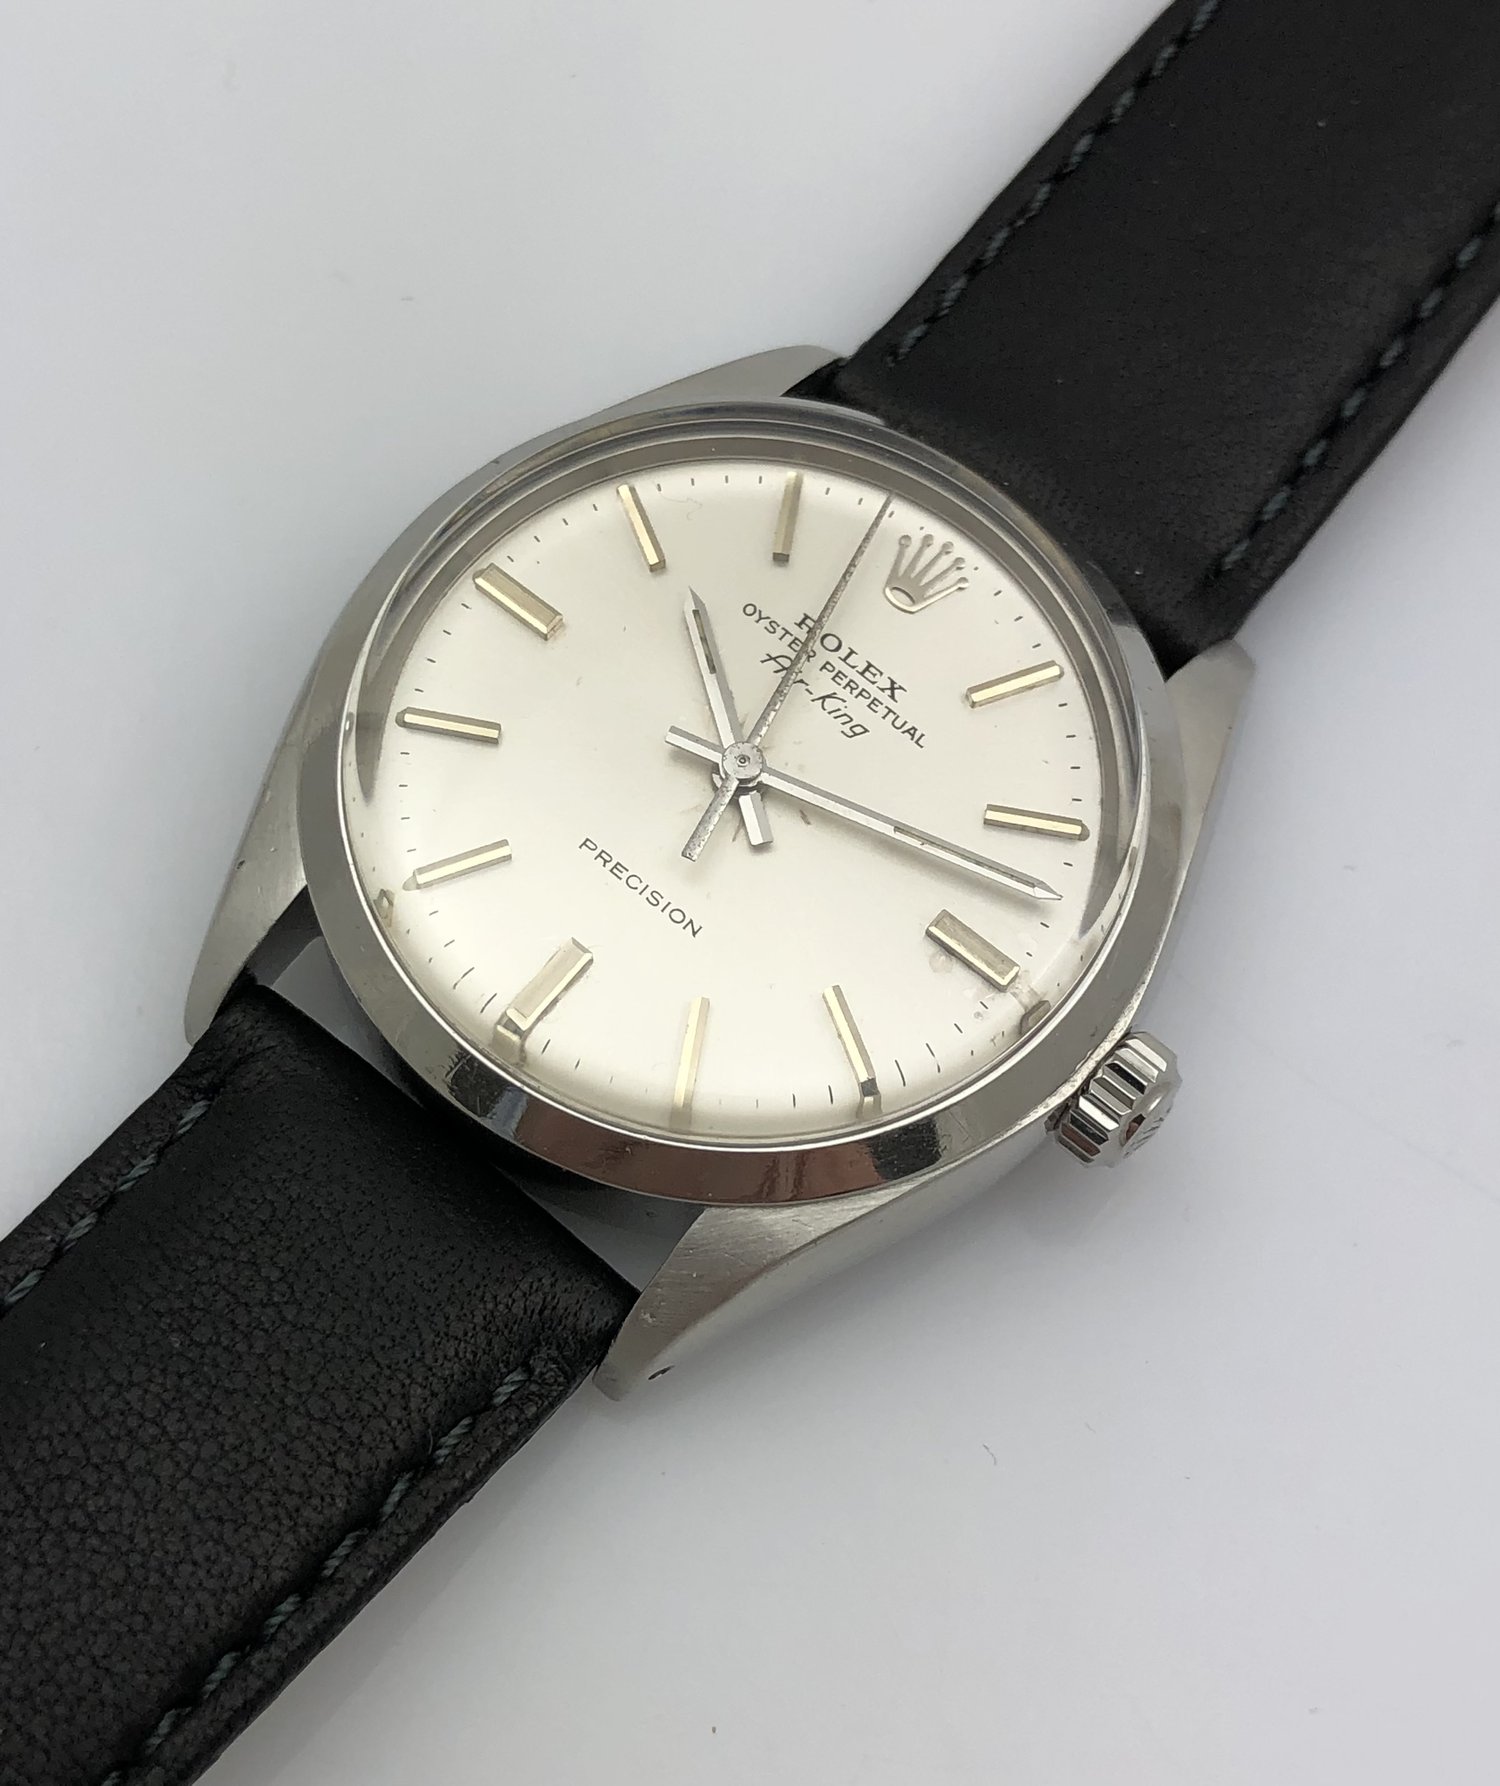 Glatte Klemme binær Rolex Oyster Perpetual AIR KING Stainless Steel Mens Wristwatch Ref 5500  Fully SERVICED circa 1975. This watch was commonly converted in the UK to  the non Chronometer Explorer 1. Same Reference 5500 — About Time